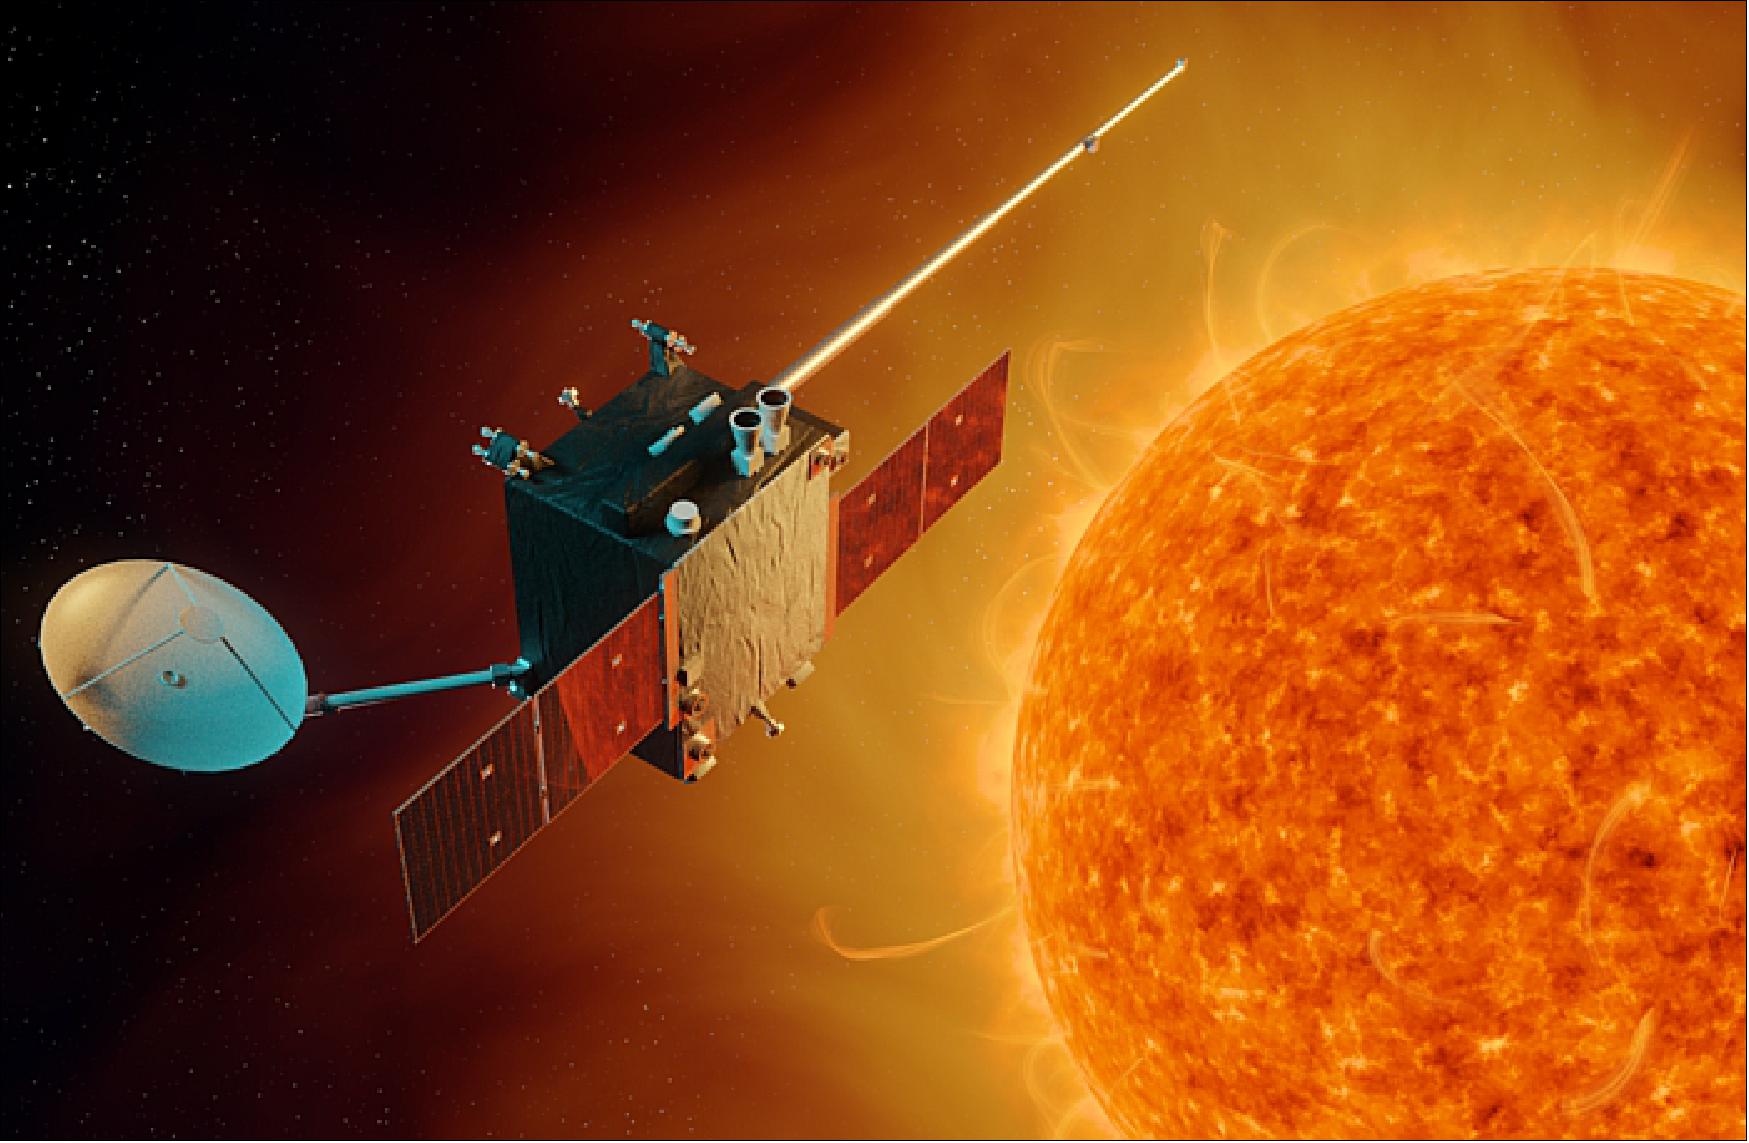 Figure 11: To ensure a robust capability to monitor, nowcast and forecast potentially dangerous solar events, ESA has initiated the assessment of two possible future space weather missions. This assessment foresees positioning spacecraft in orbit at the L1 and L5 Lagrangian points - points in space where gravitational forces and the orbital motion of the spacecraft, the Sun and Earth interact to create a stable location from which to make observations (image credit: ESA/A. Baker, CC BY-SA 3.0 IGO)